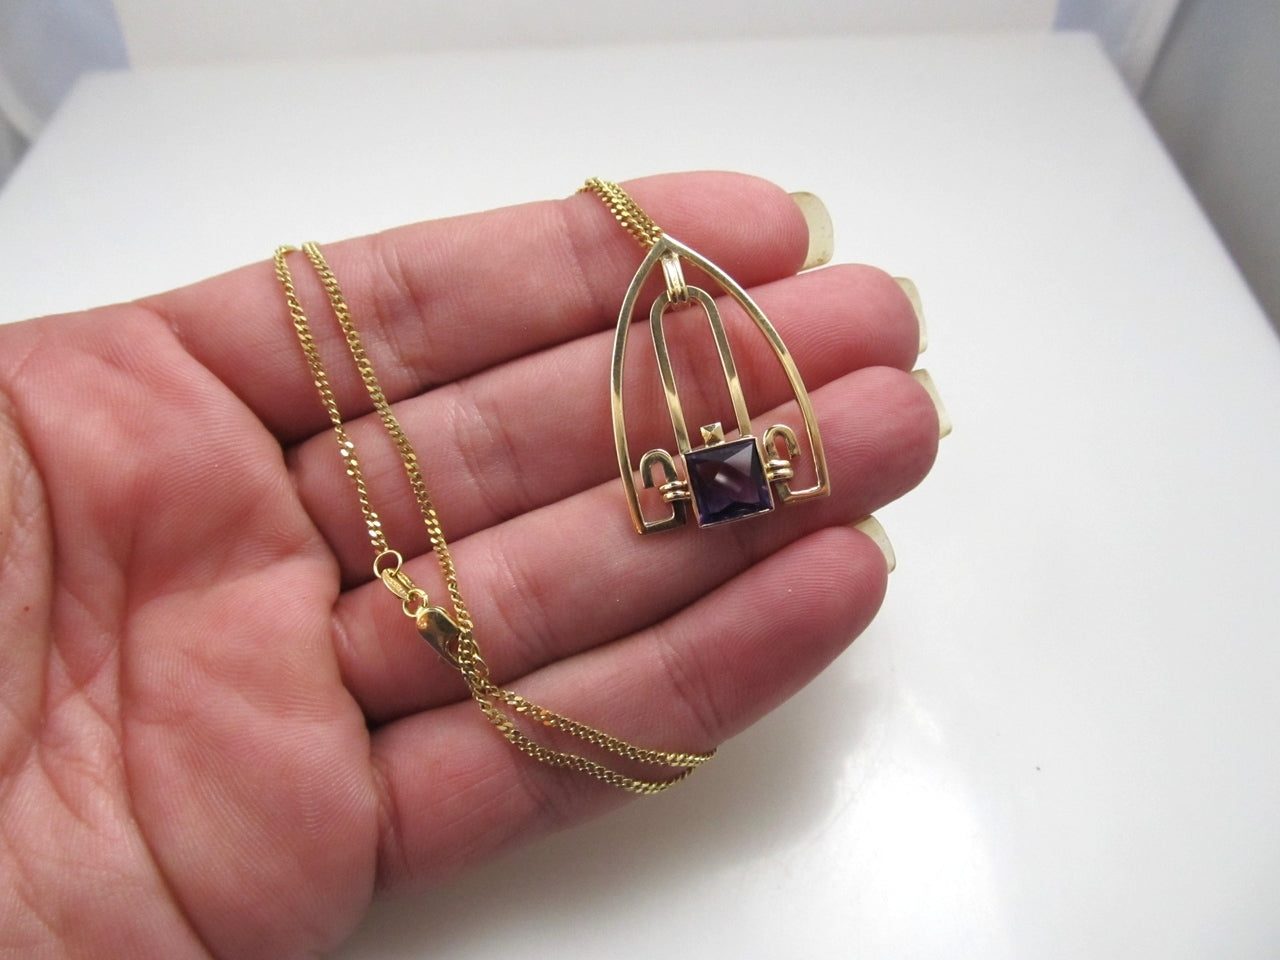 Art Deco 14k Yellow Gold Necklace With An Amethyst, Circa 1920